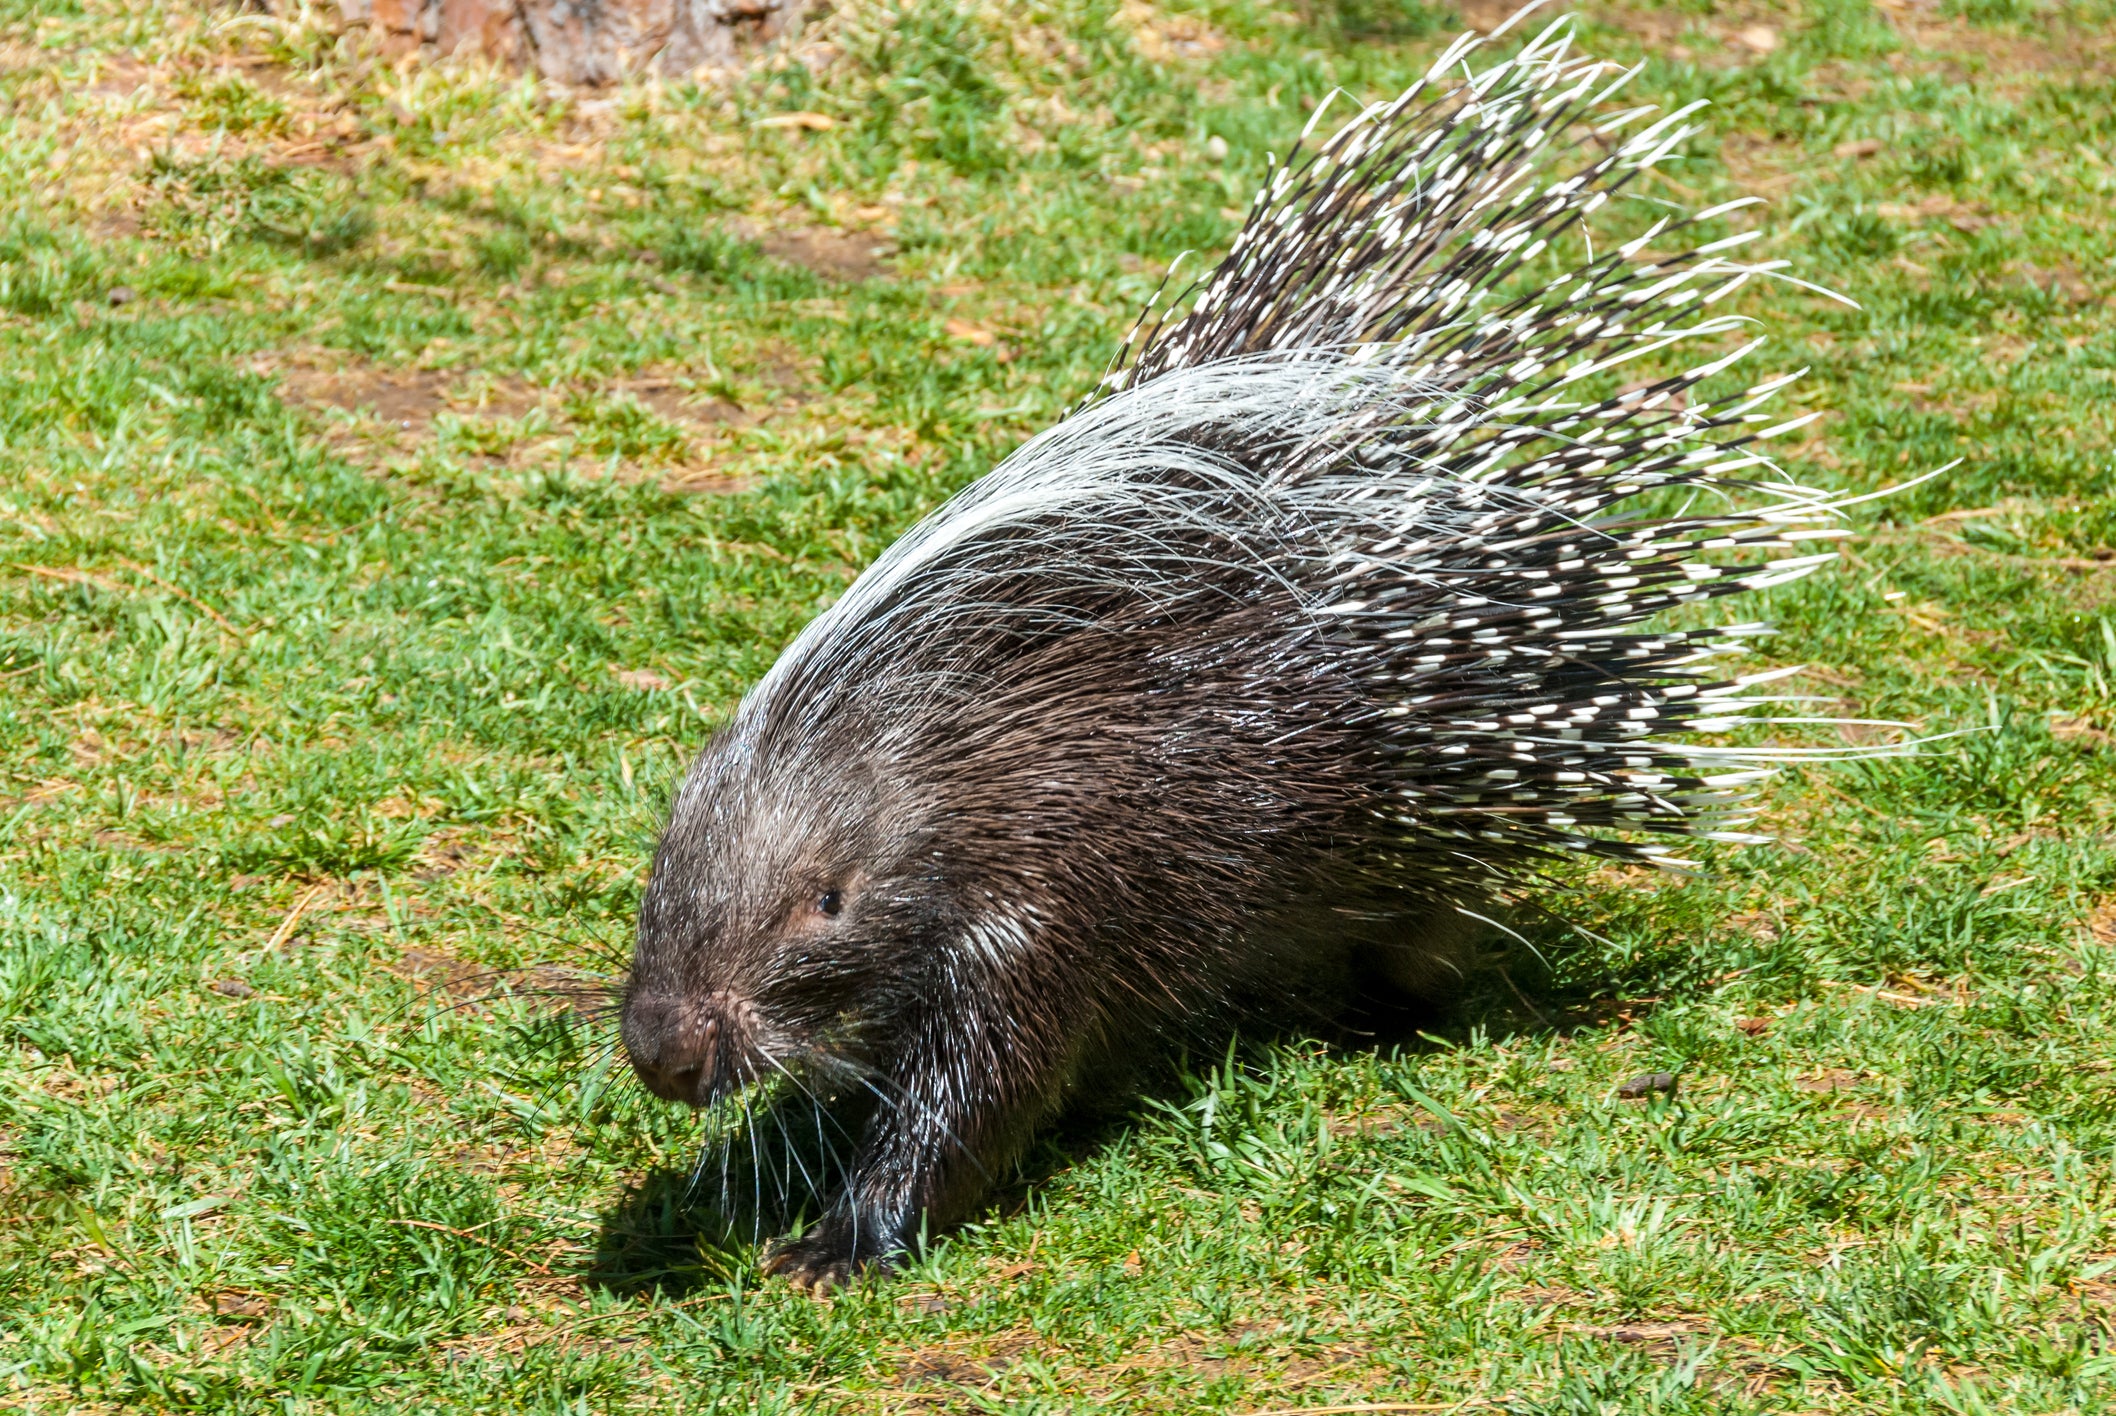 Maine police officers get jail time for beating porcupines to death while on-duty